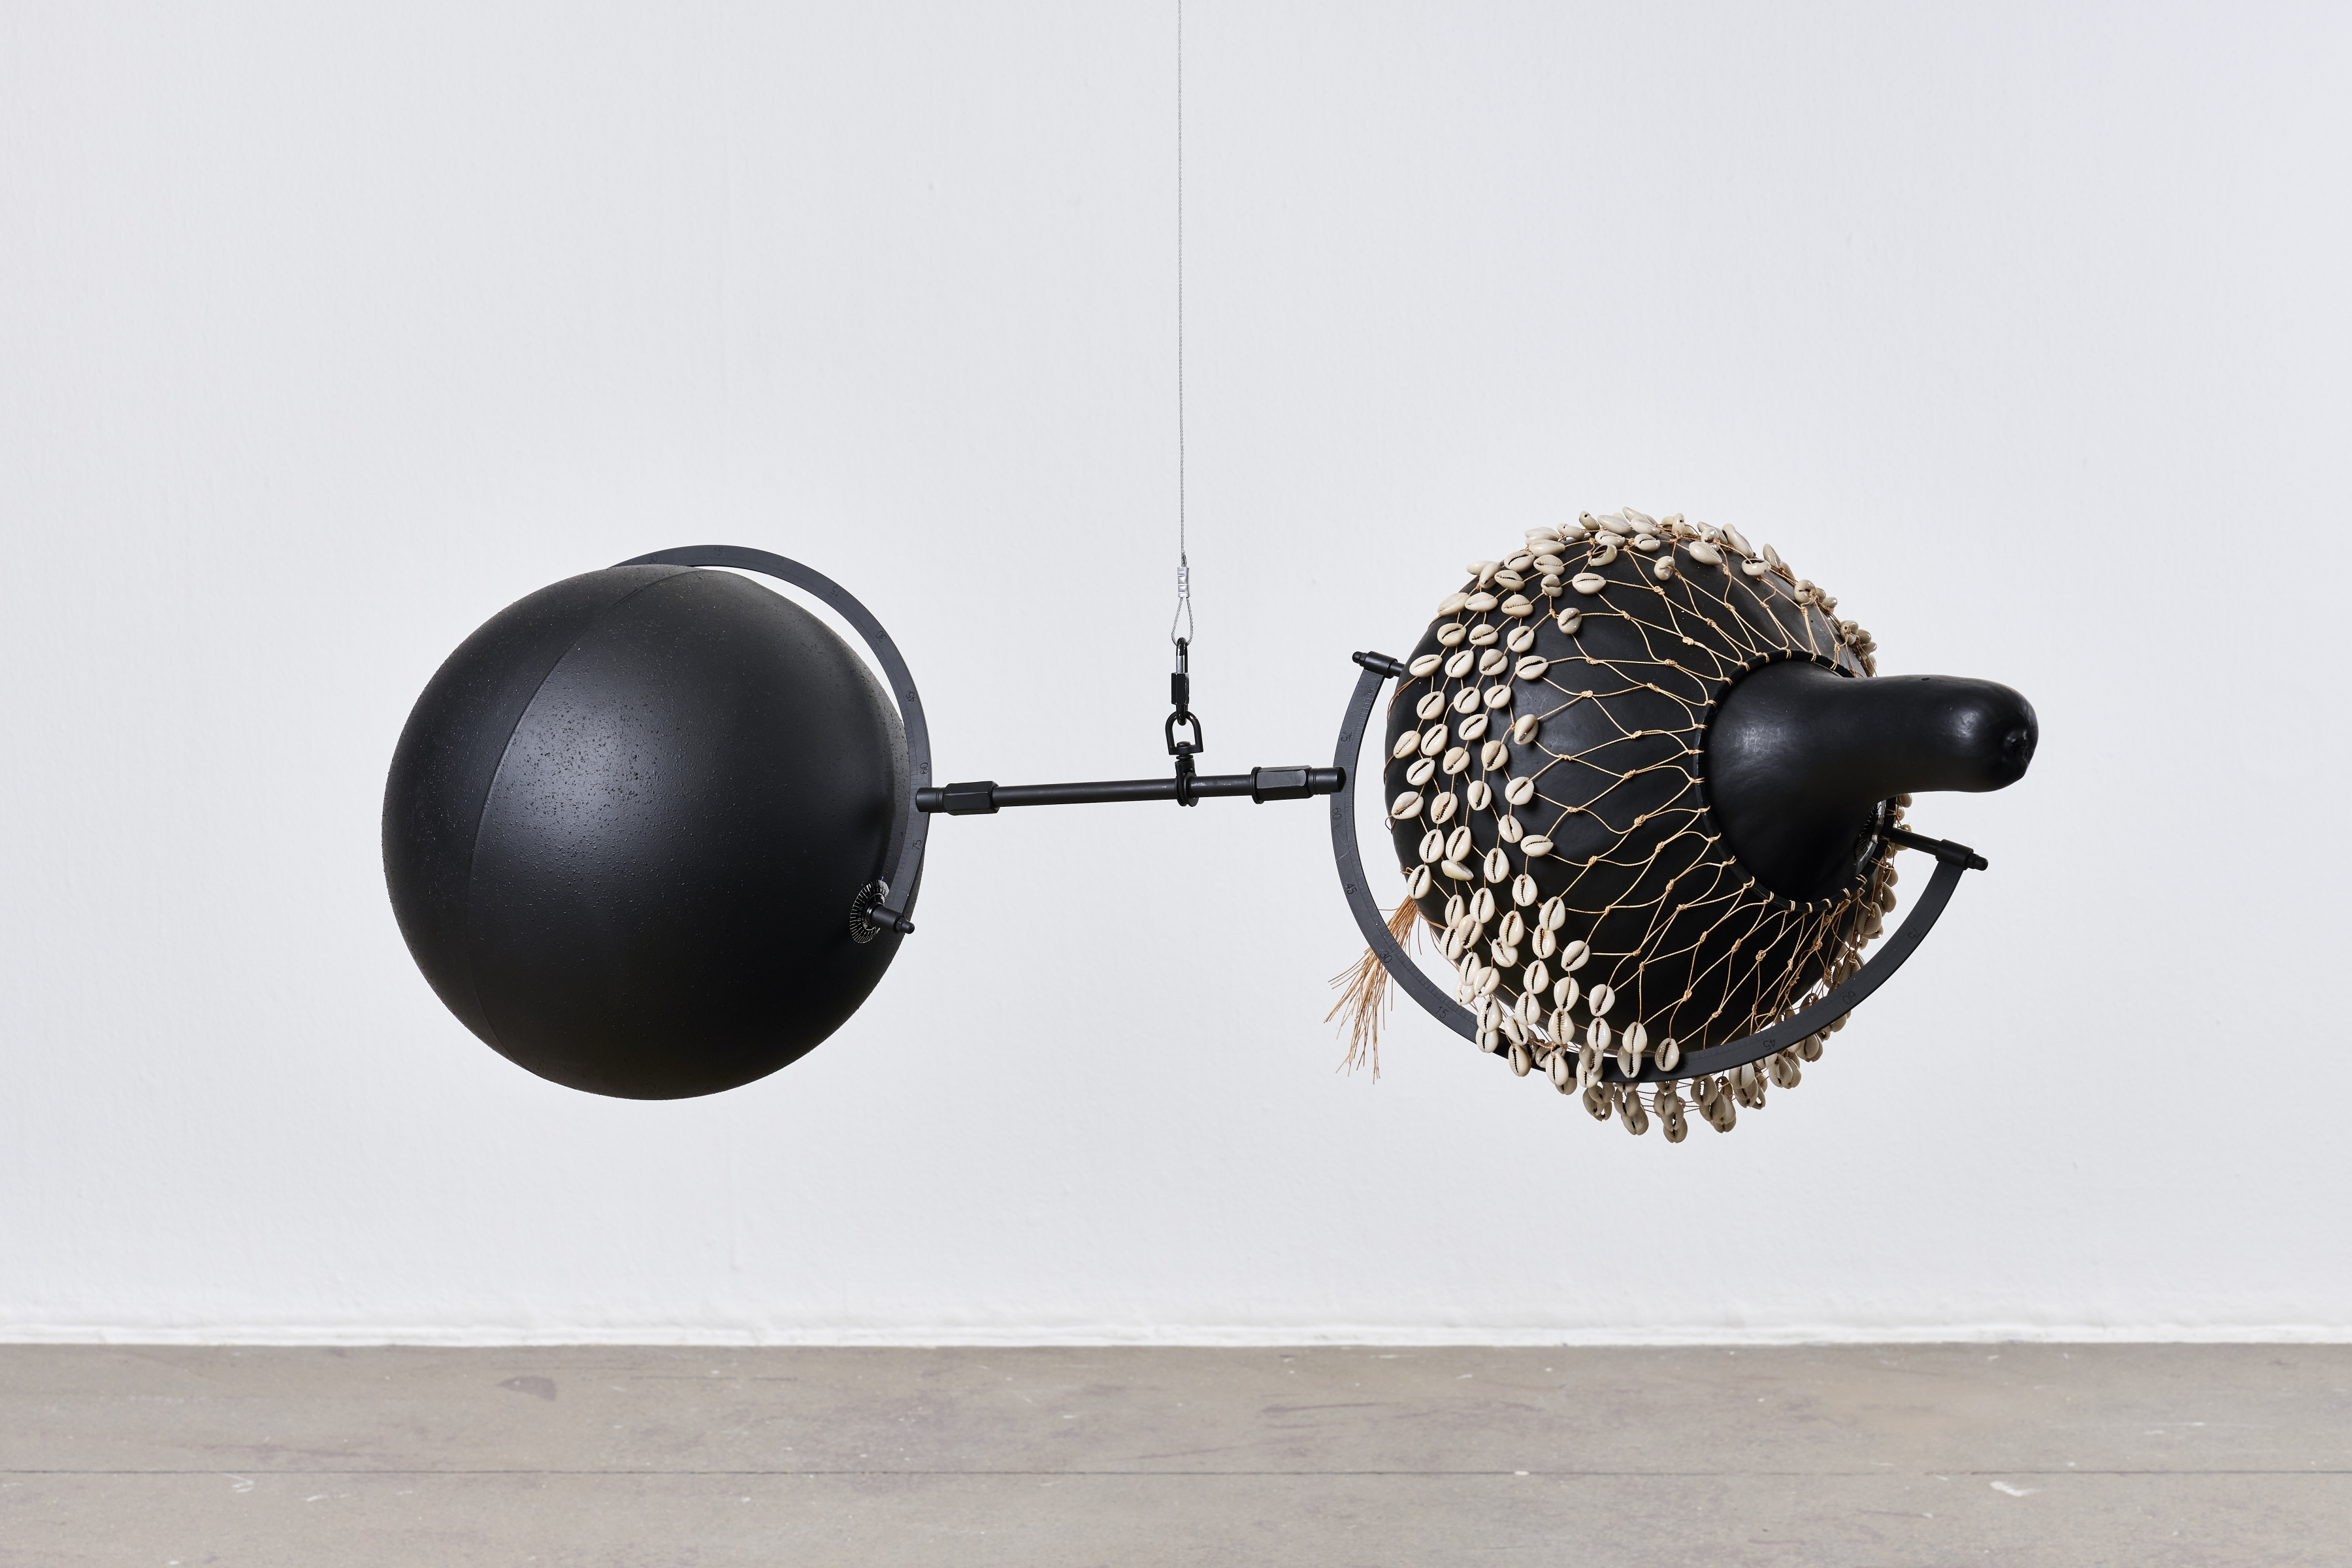 binary model (a two body problem)

2021

altered calabash and PET plastic globe model, synthetic stone finish, black primer, cowry shell veil and aluminium rod

28.3 x 97.1 x 32.2 cm

sales enquiries